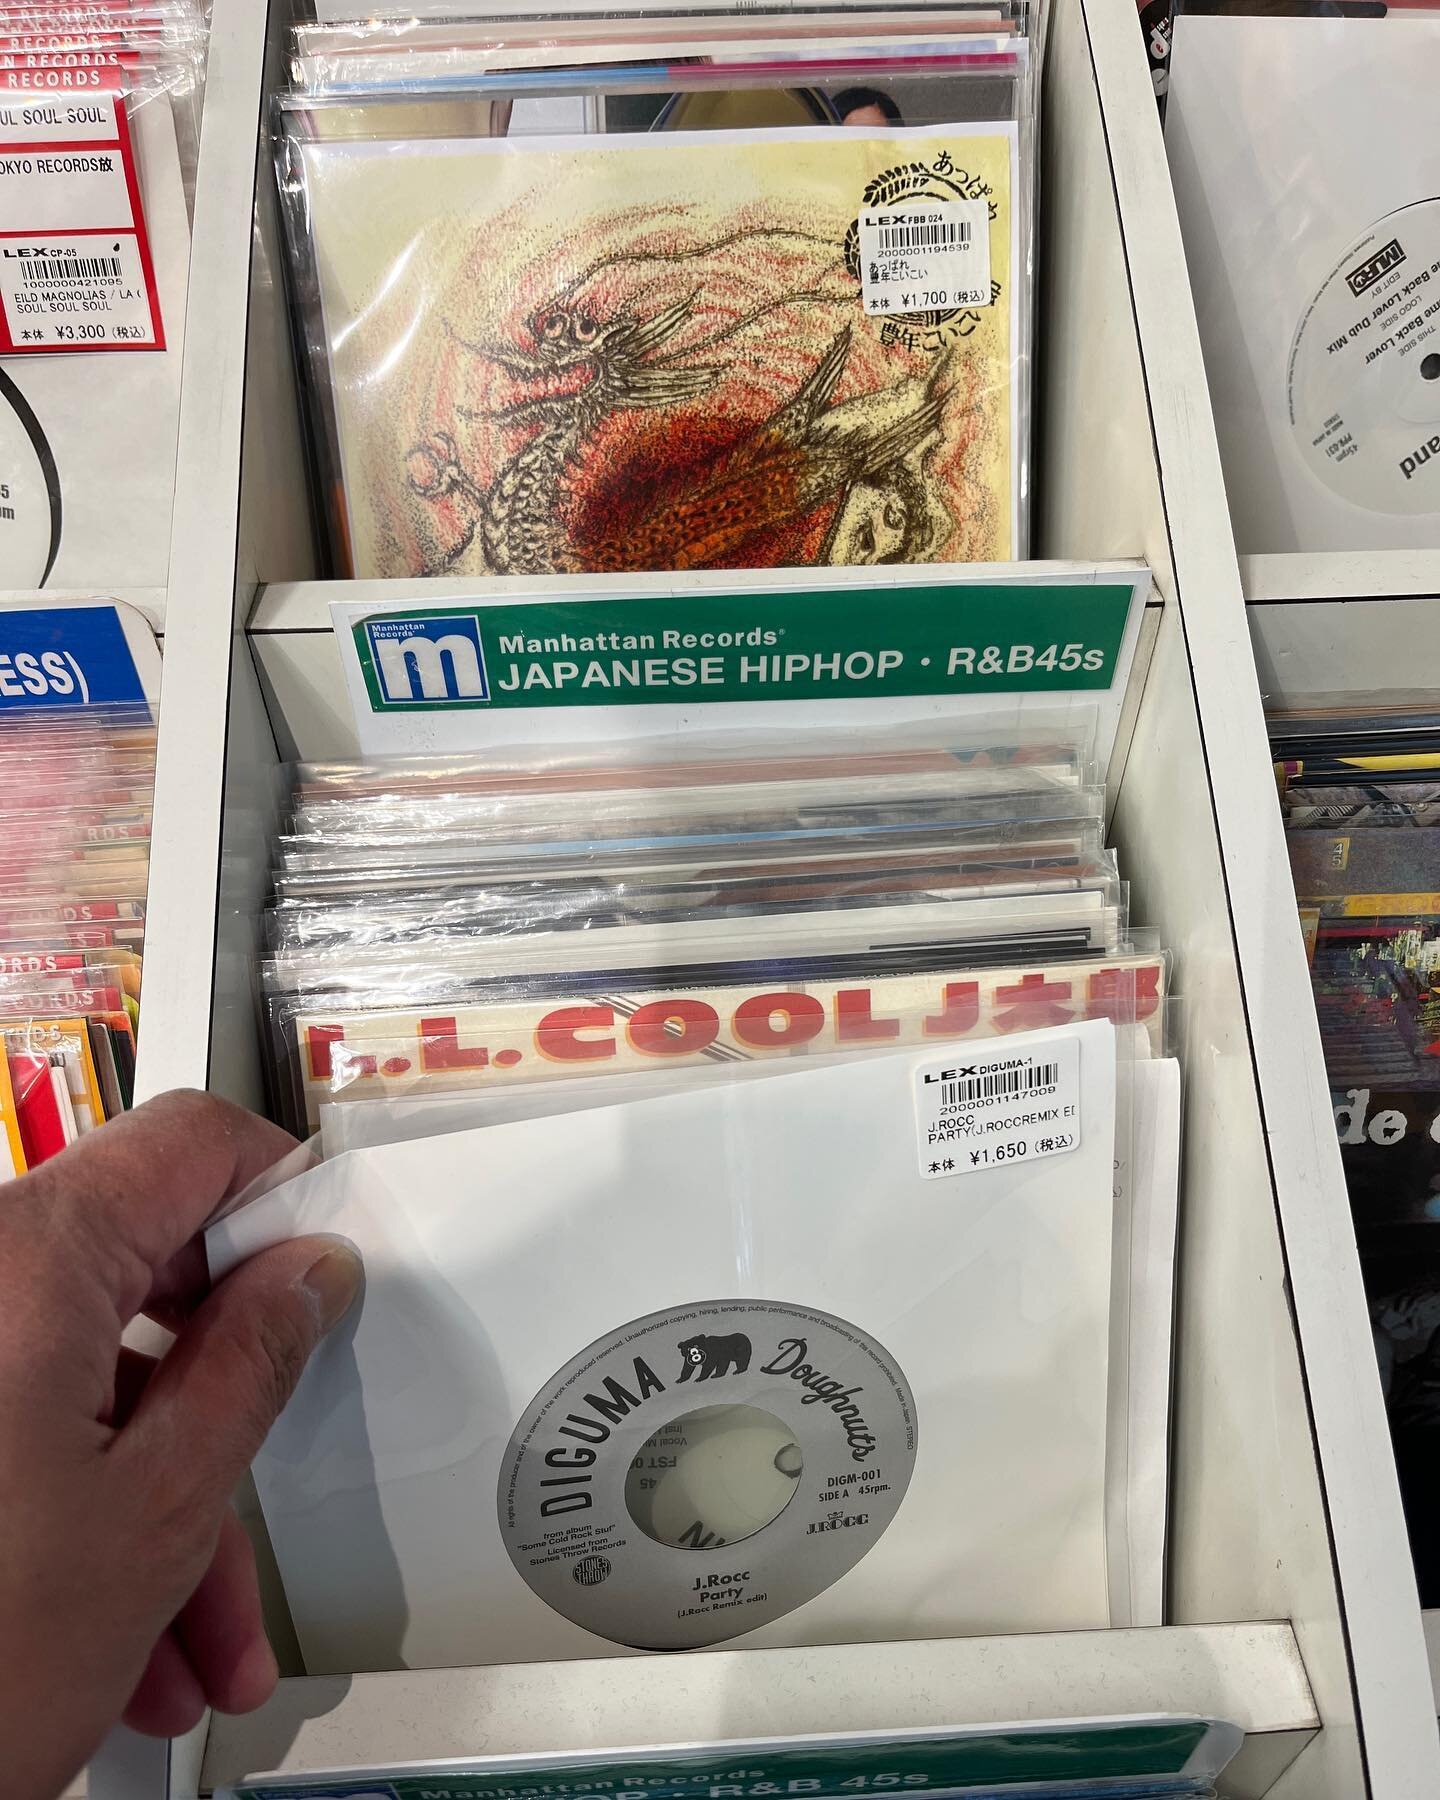 Diggin for 45s in Tokyo to add to the vinyl collection.  First stop was Manhattan Records in Shibuya.  Be prepared to spend a time finding the right musical souvenir to bring home.  Most of it will be spent translating the artist and song names from 